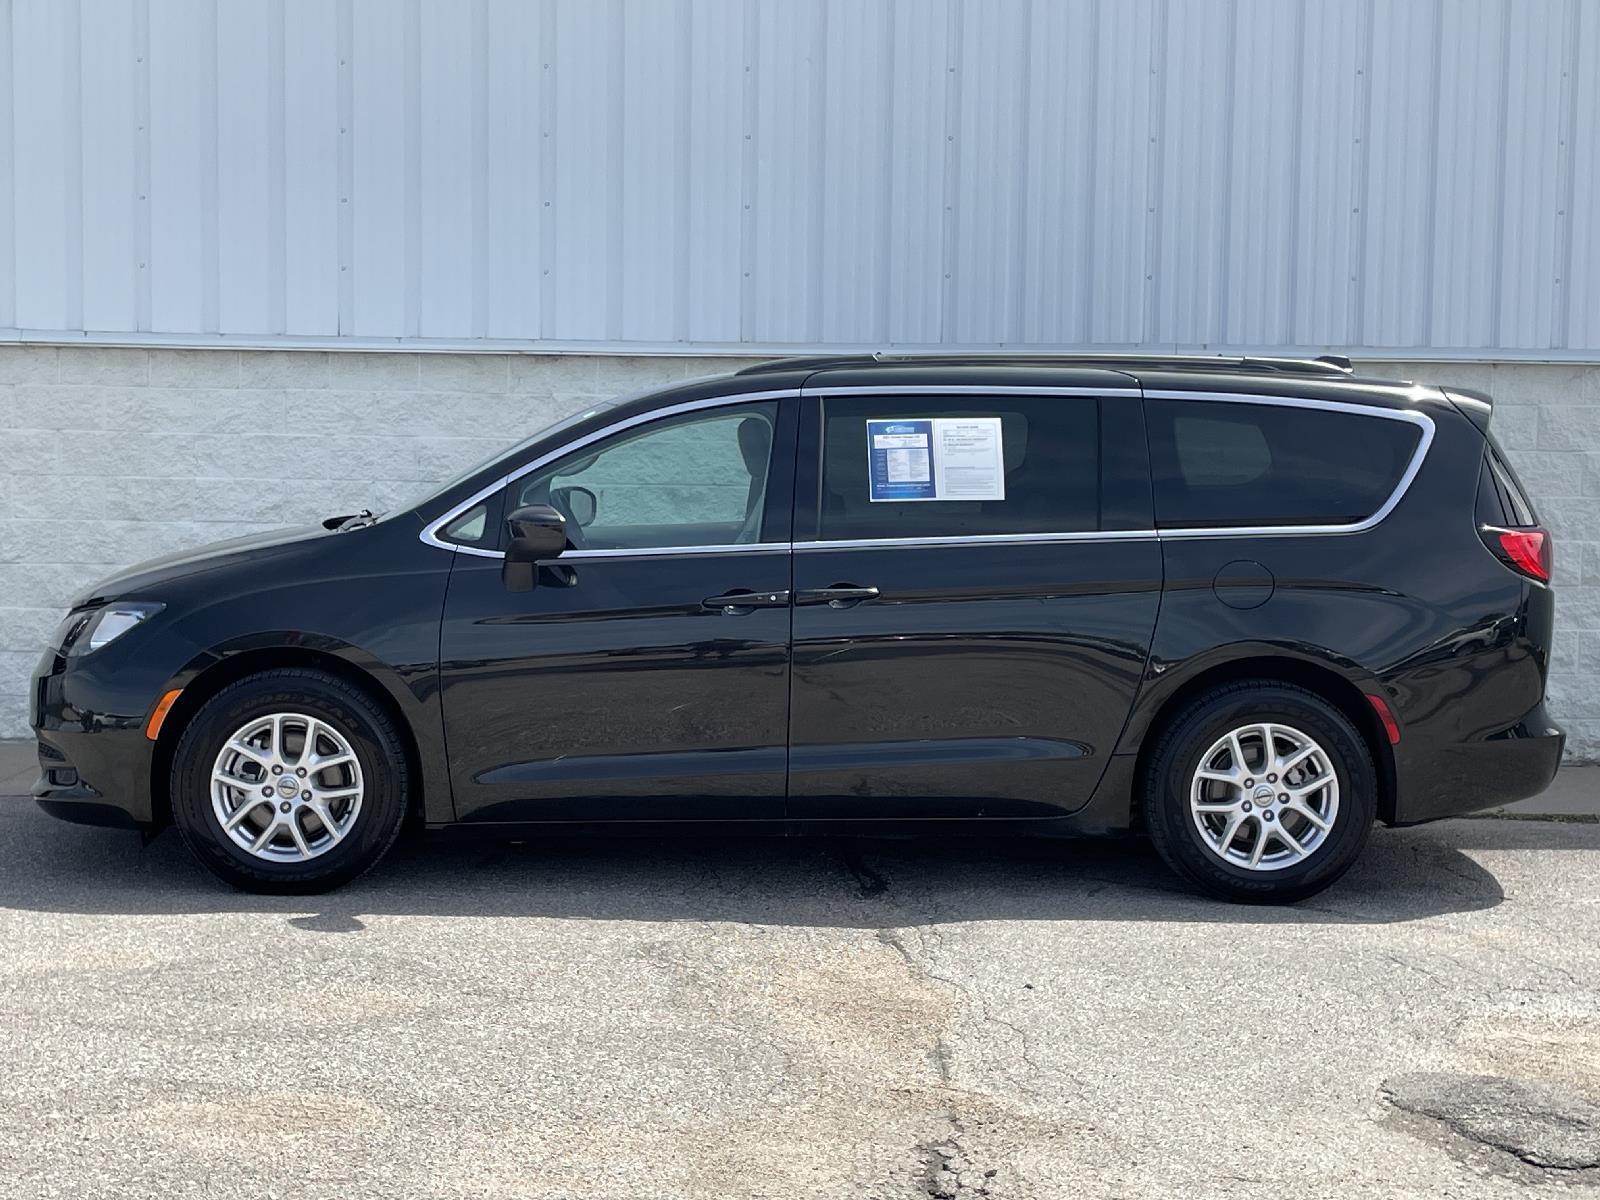 Used 2021 Chrysler Voyager LXI Minivans for sale in Lincoln NE